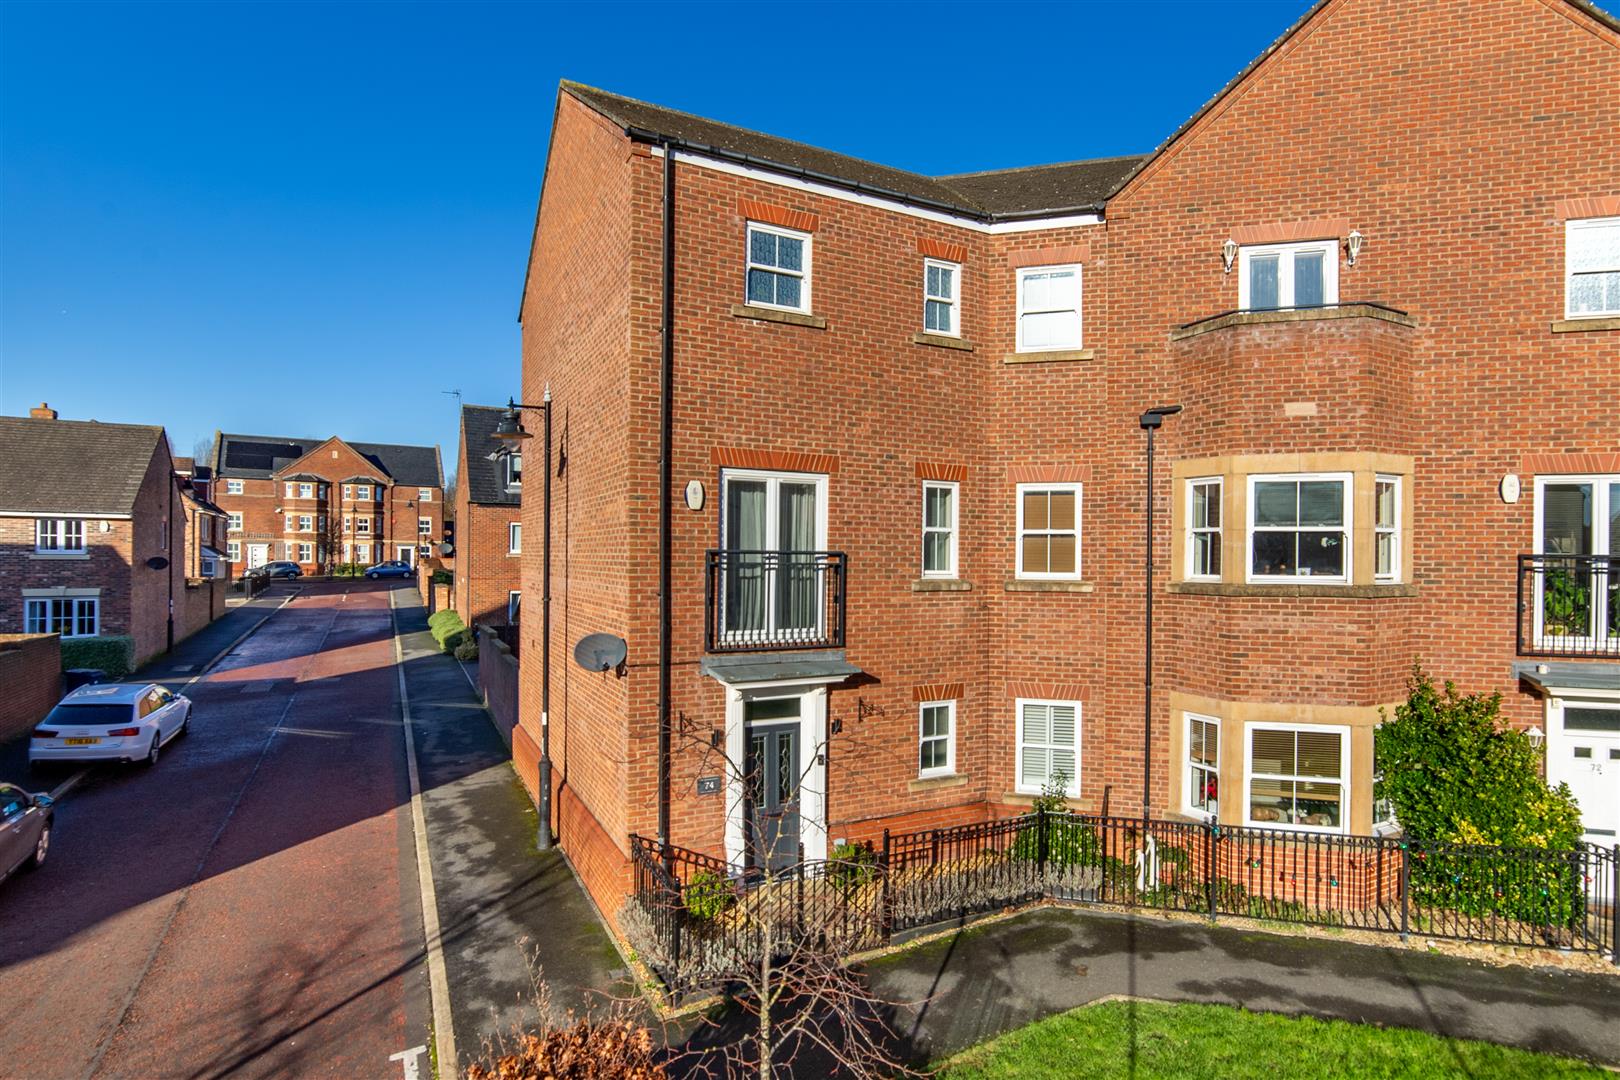 6 bed town house for sale in Featherstone Grove, Great Park, NE3 